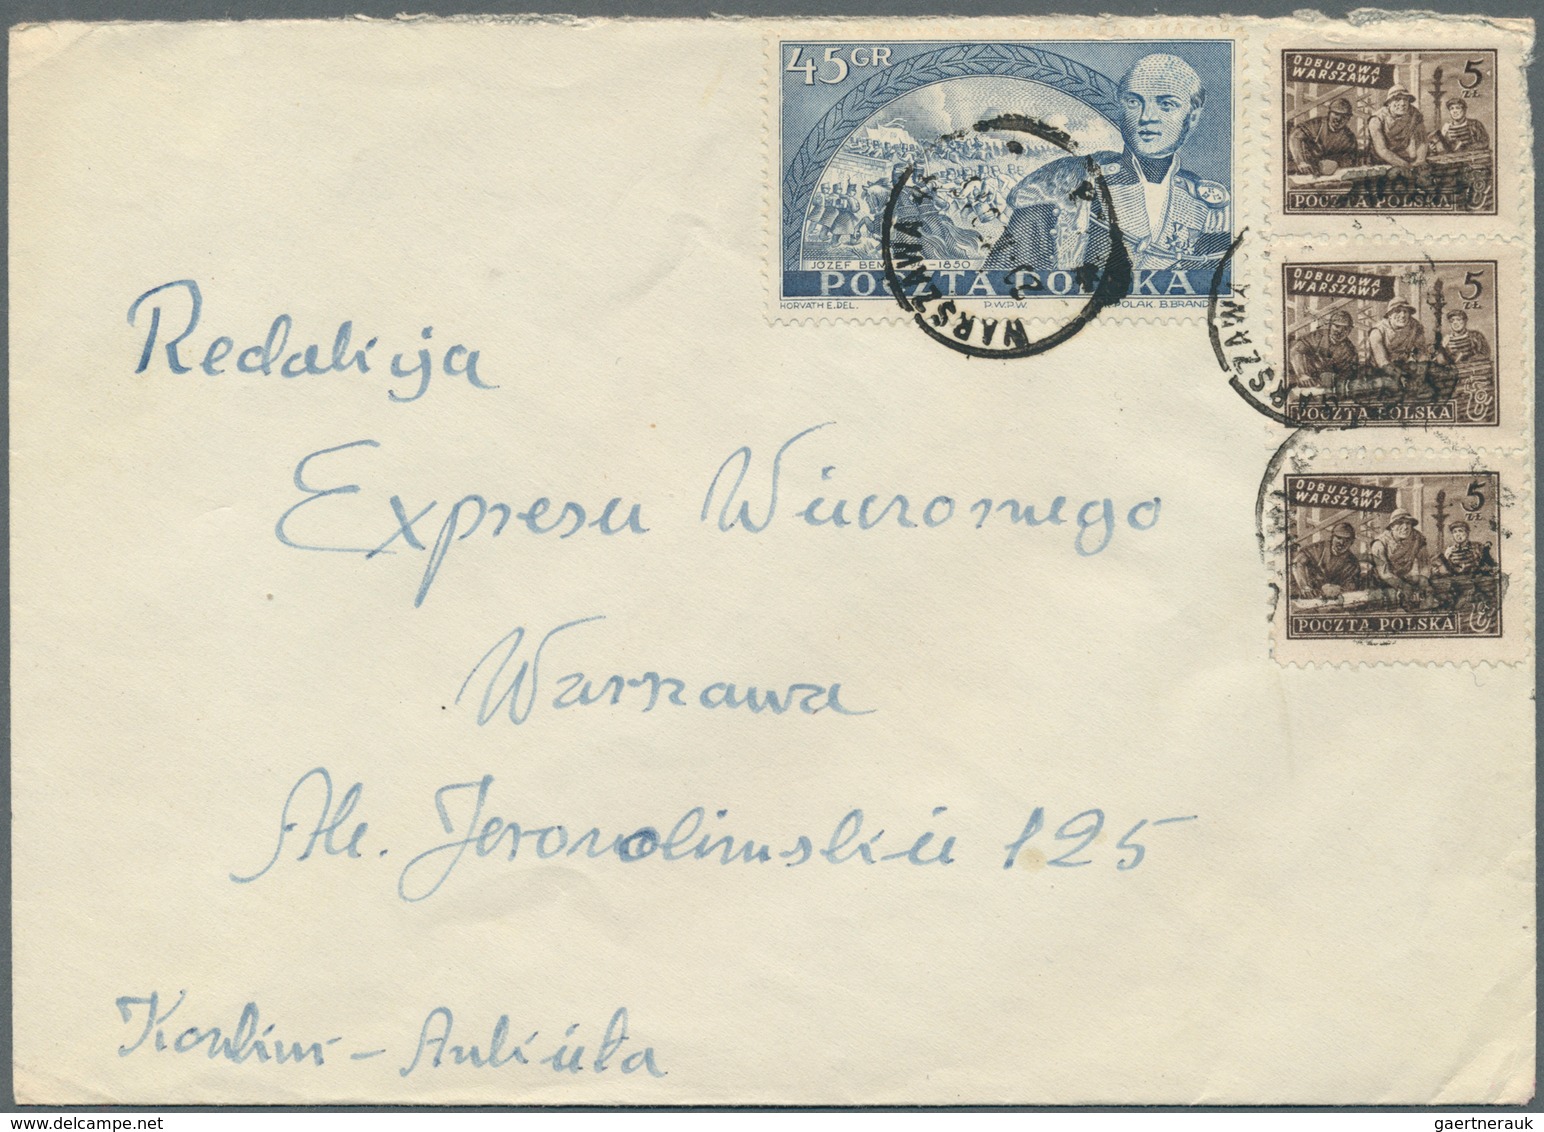 27726 Polen: 1950/1951, GROSZY OVERPRINTS: very comprehensive collection of more than 250 covers from the